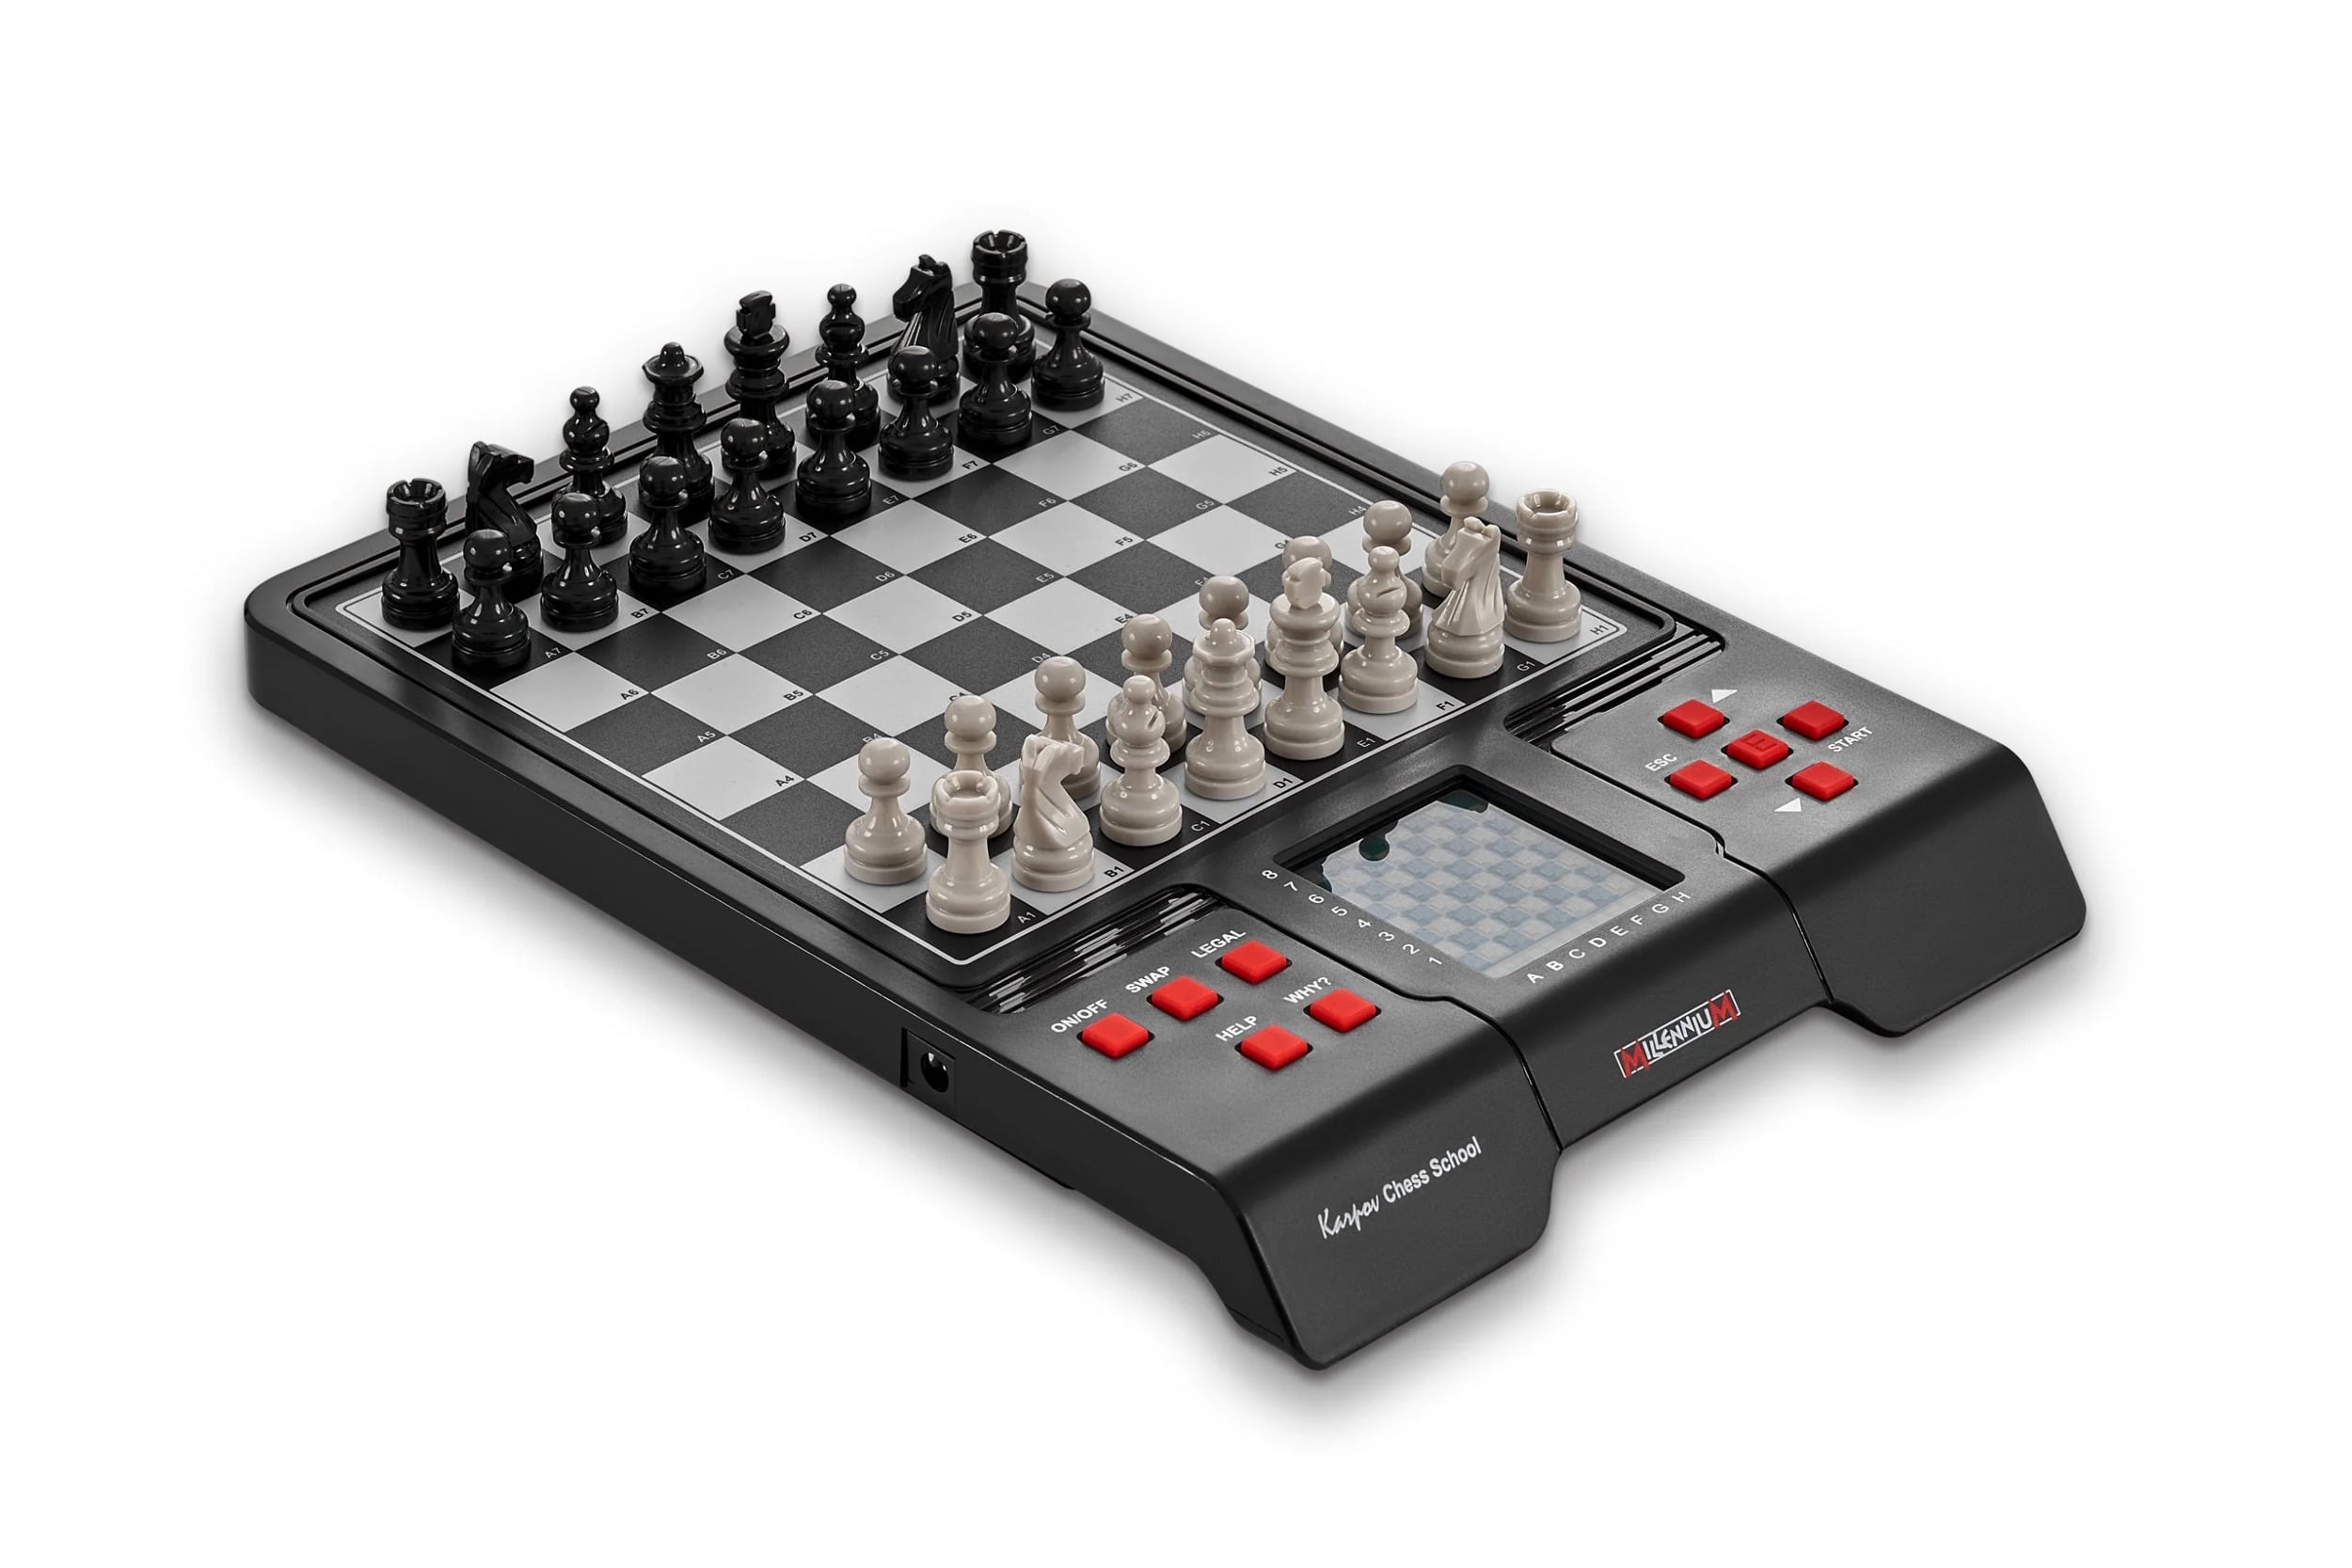 Buy cheap FPS Chess cd key - lowest price